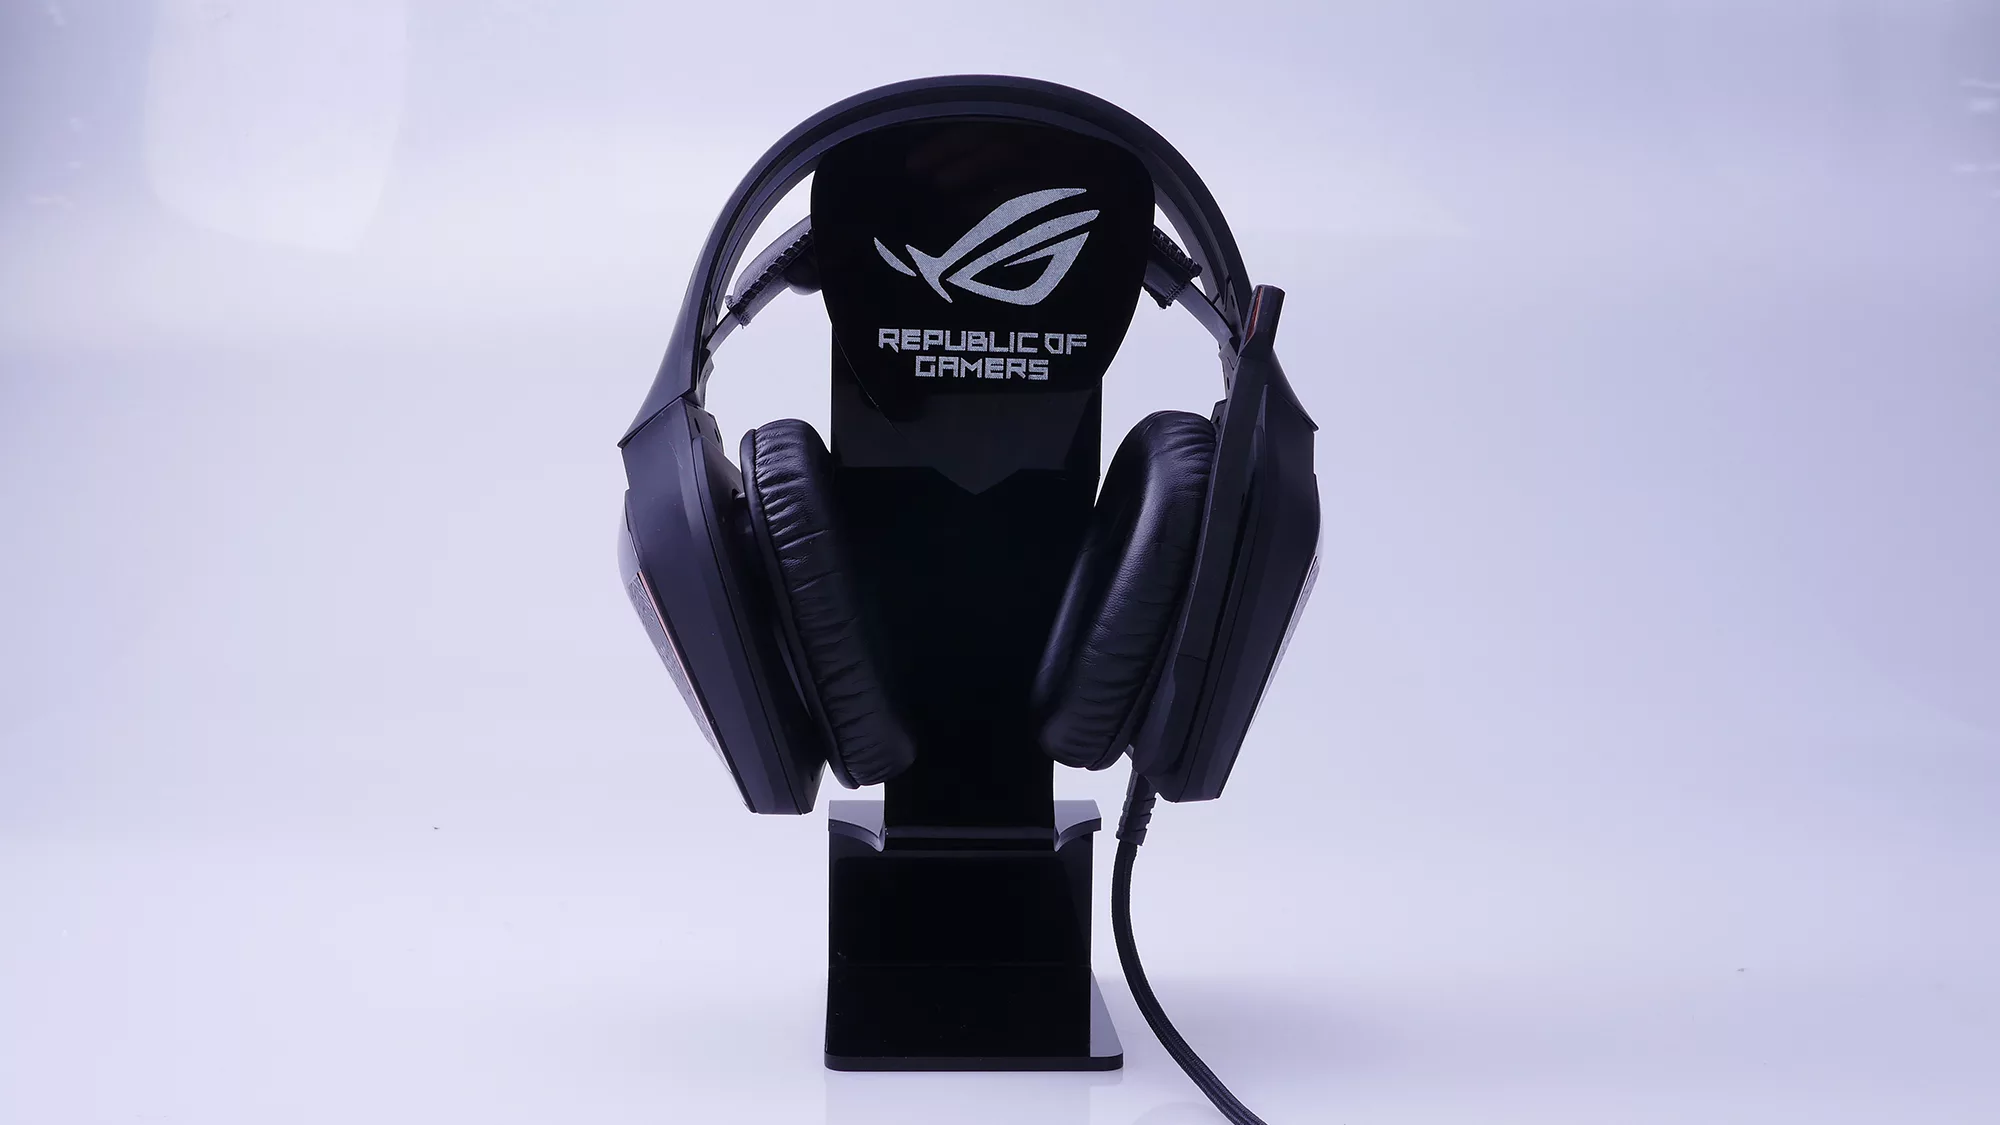 Gallery: ROG Centurion True 7.1 Surround Sound Gaming Headset - Up Close |  ROG - Republic of Gamers Global